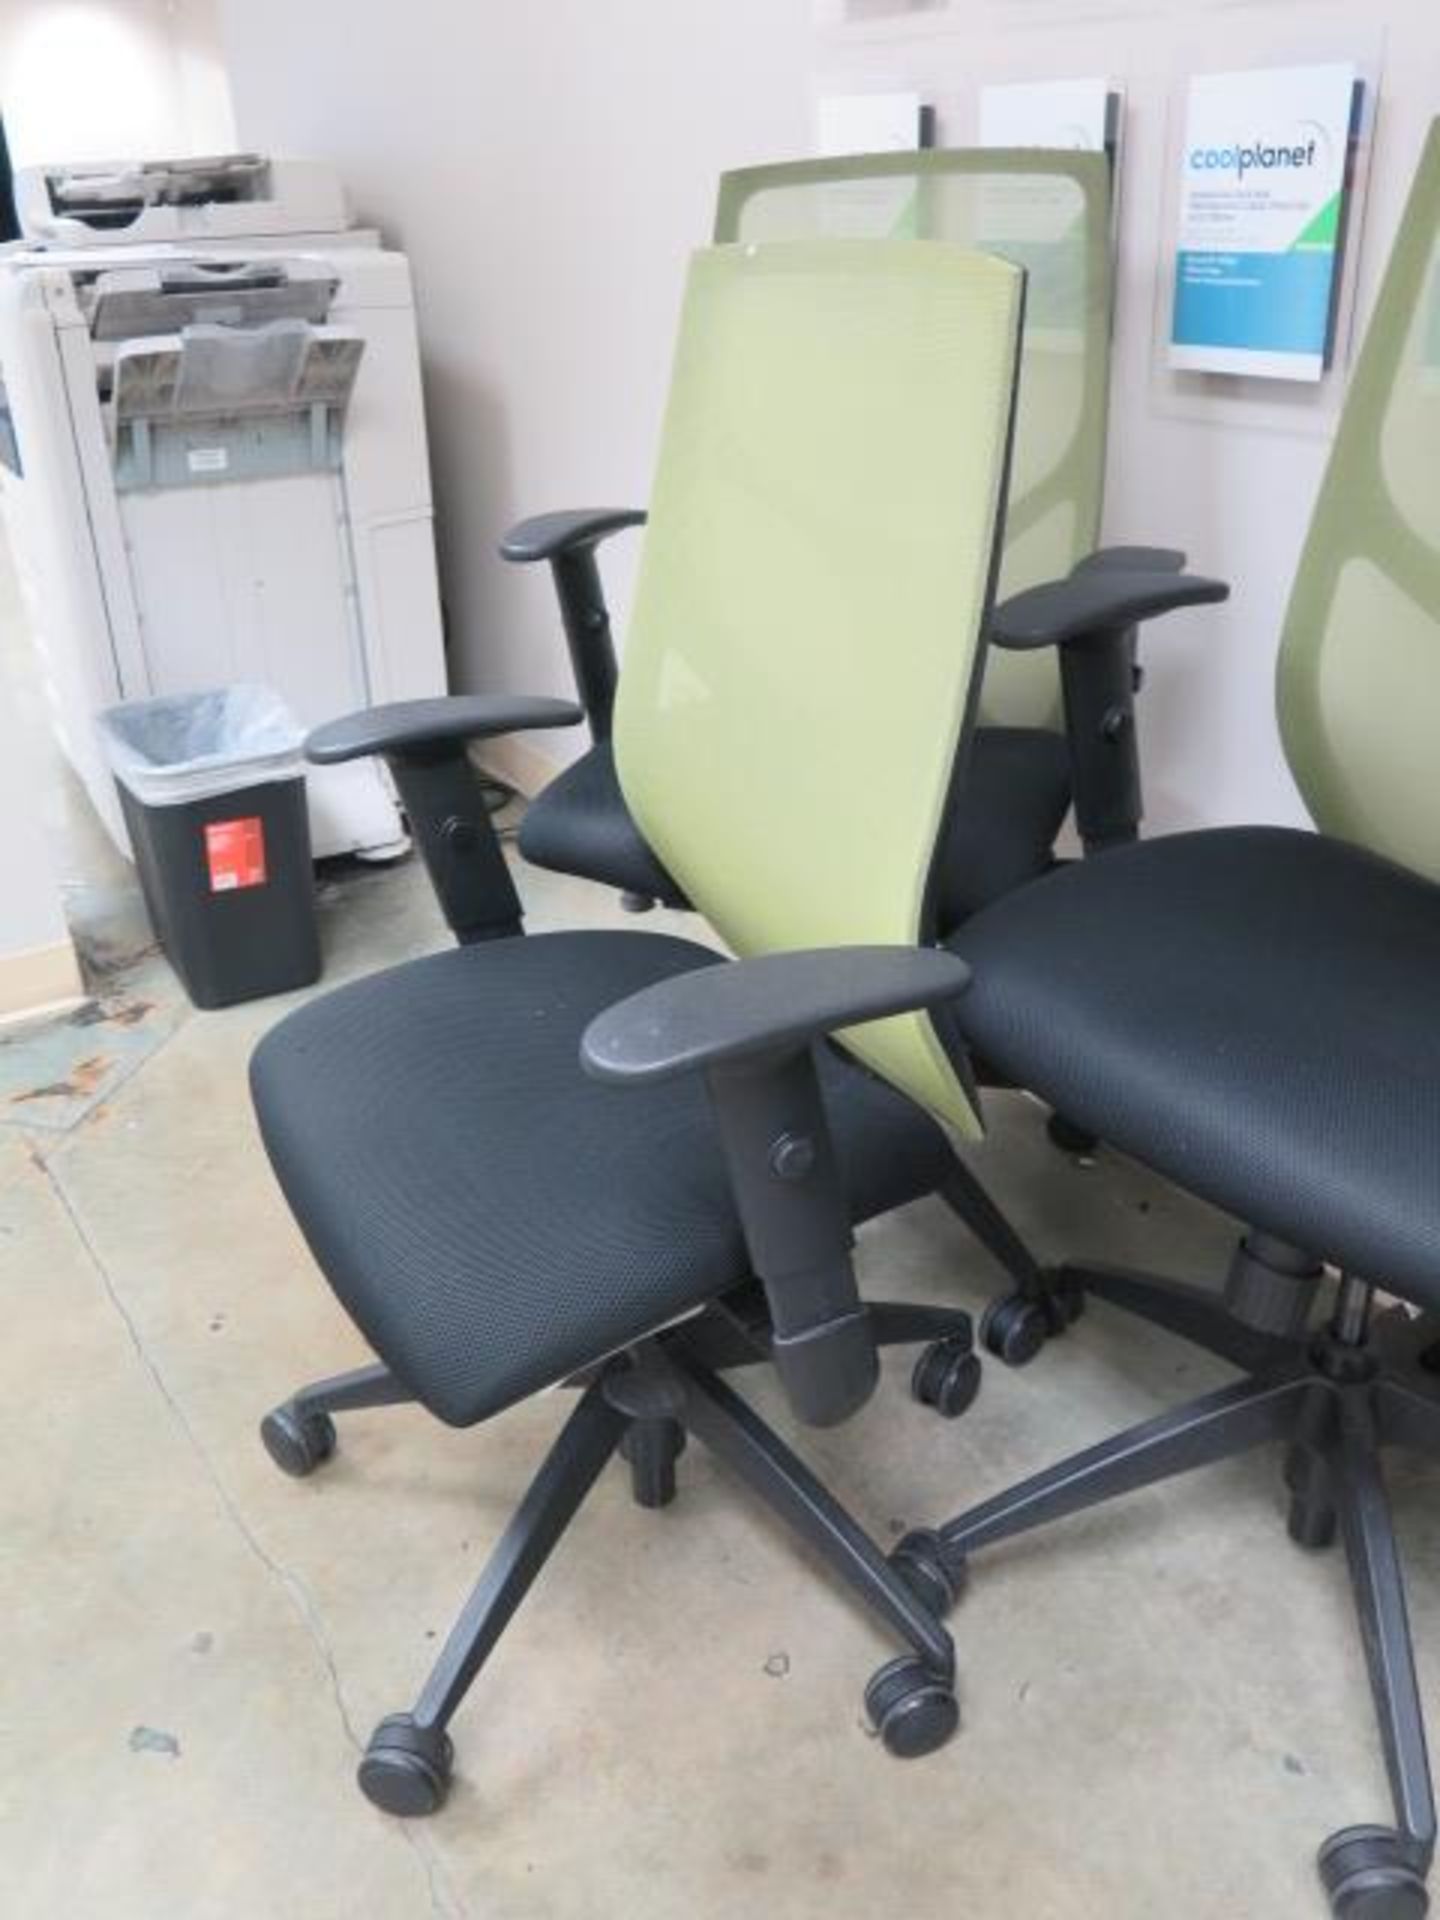 Ergonomic Office Chairs (7 - Green) - Image 3 of 5